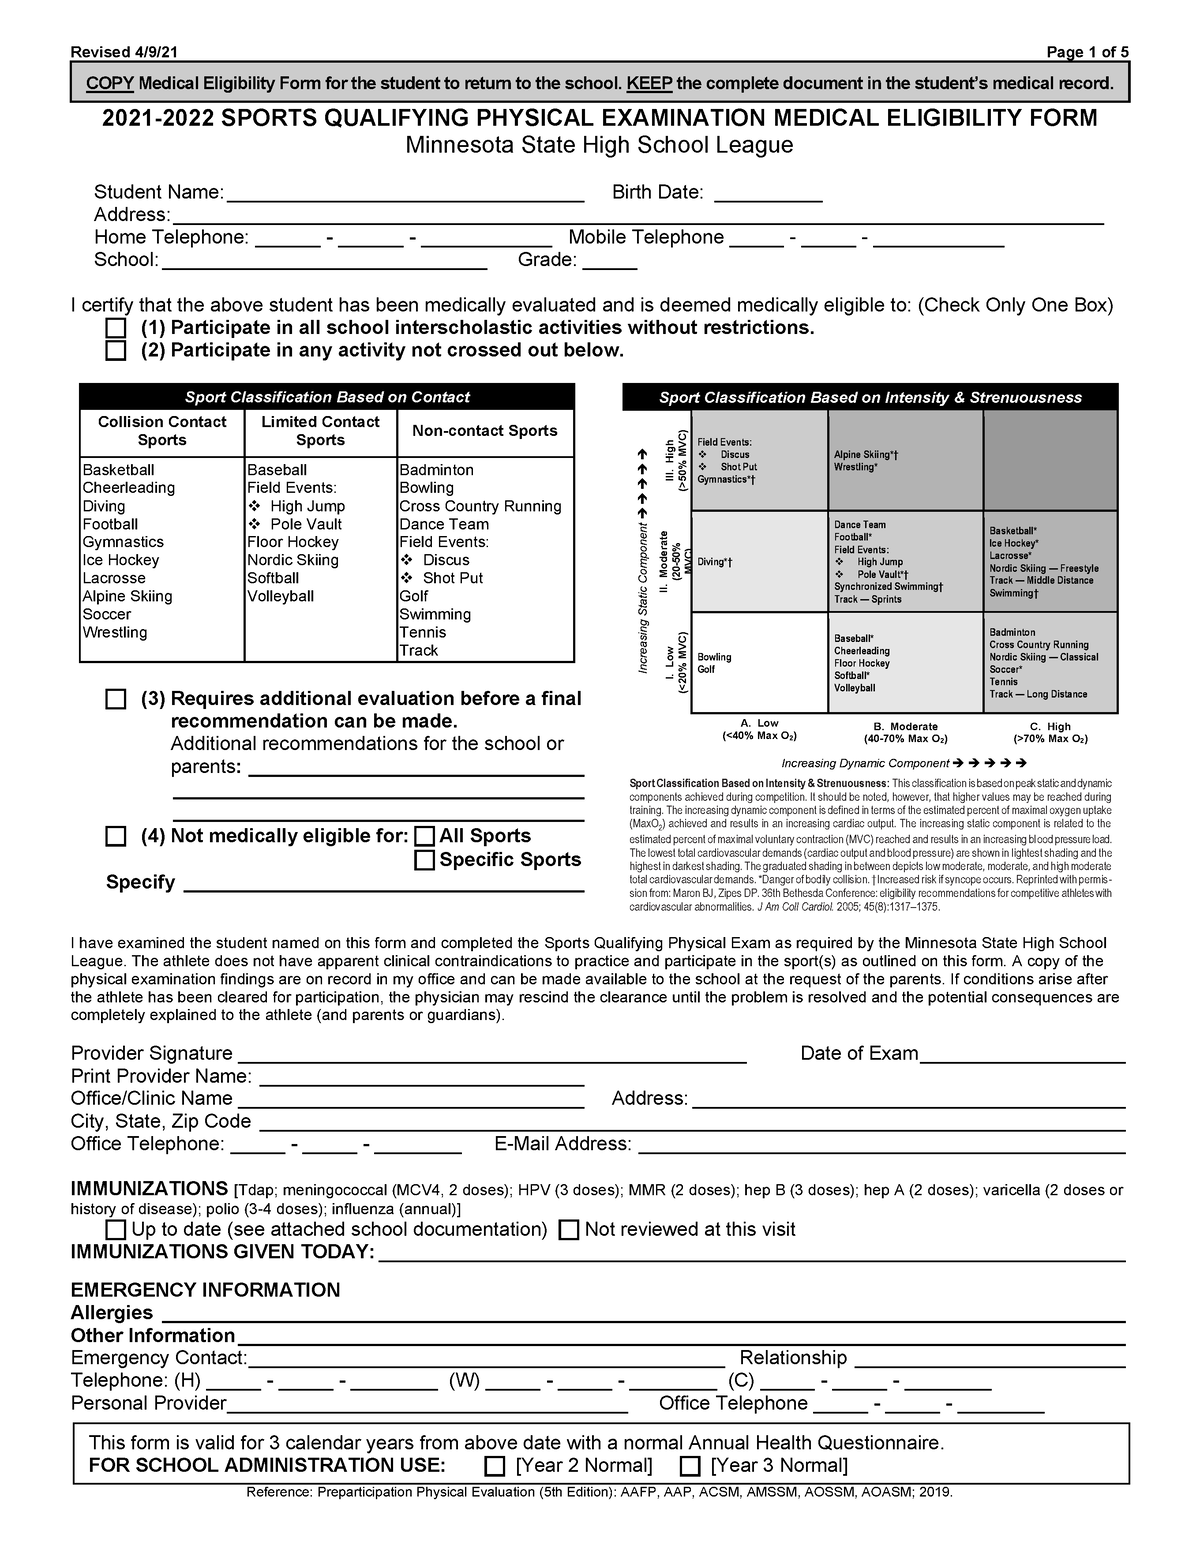 mshsl-sports-physical-form-2021-22-copy-medical-eligibility-form-for